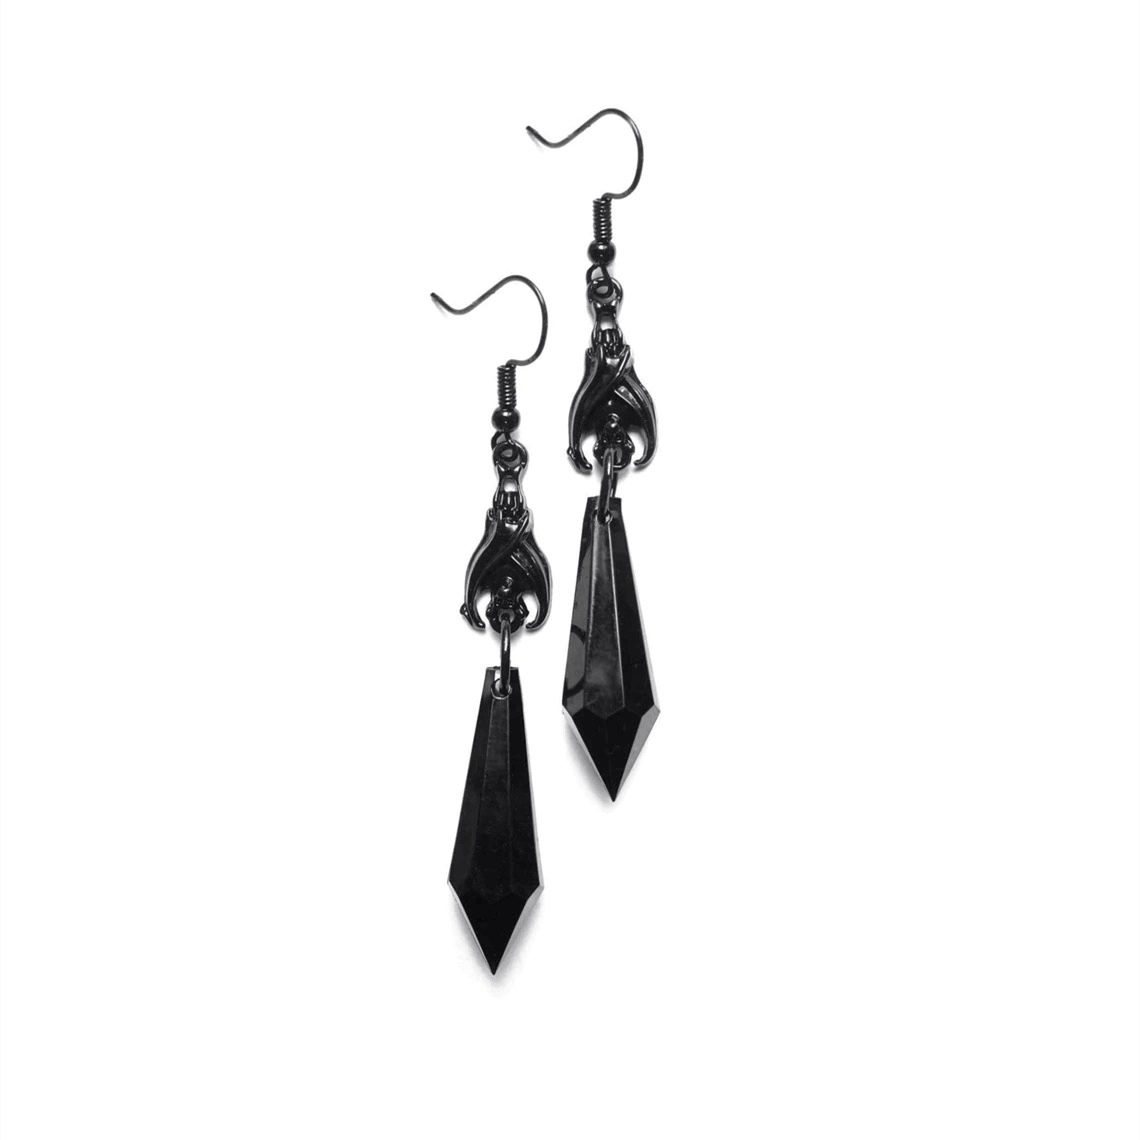 Gothic Bat Earrings with Teardrop Beads / Alternative Female Jewelry / Fashion Accessories